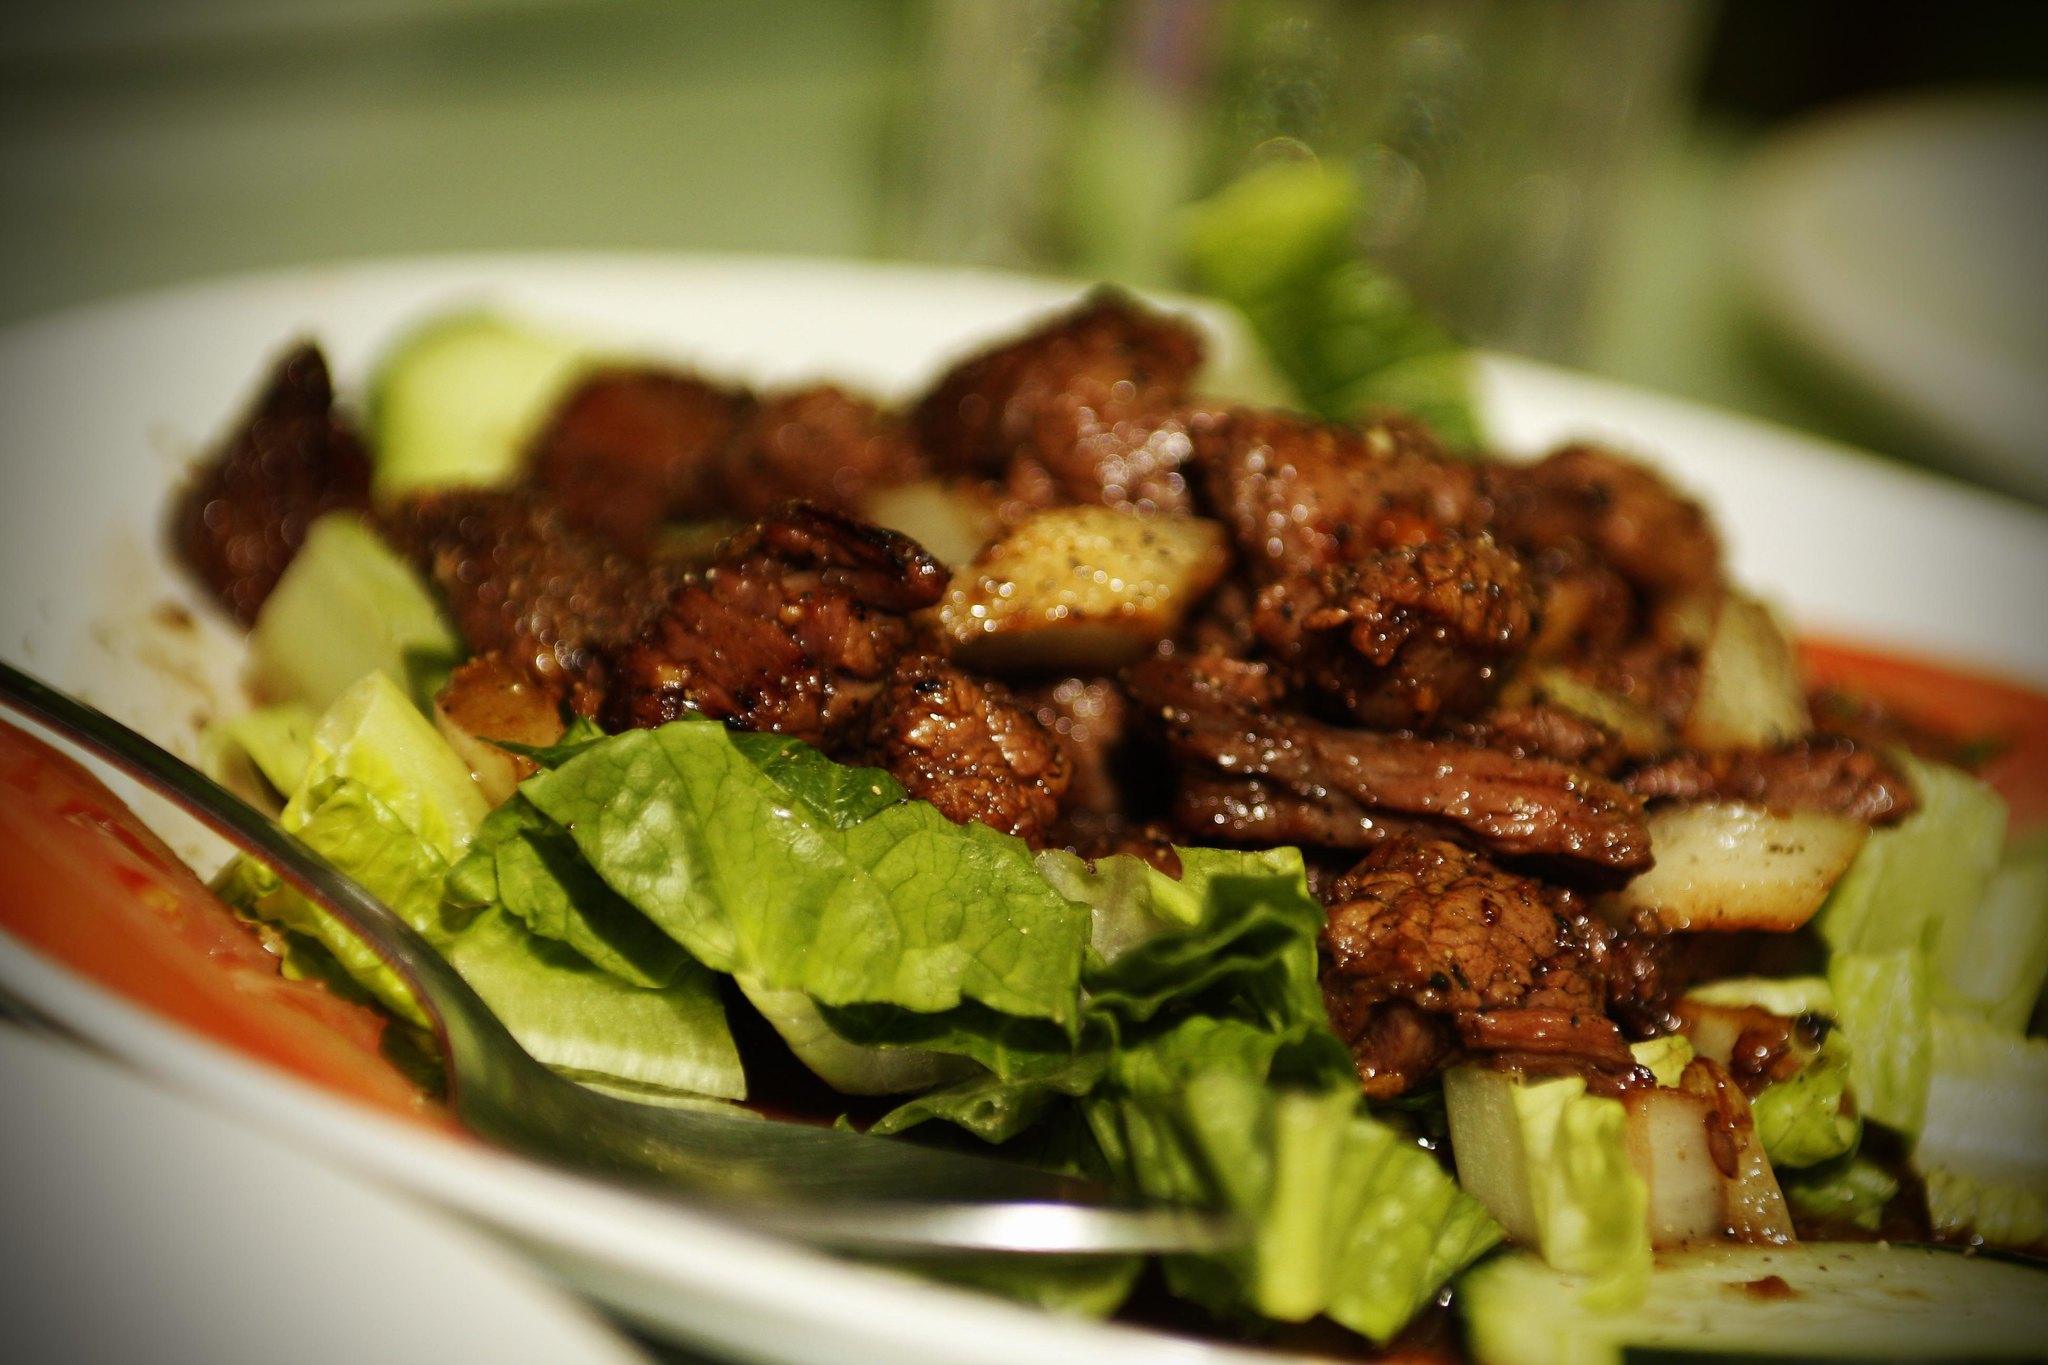 Asian Cuisine 11 Vietnamese Cuisines that Will Satisfy You